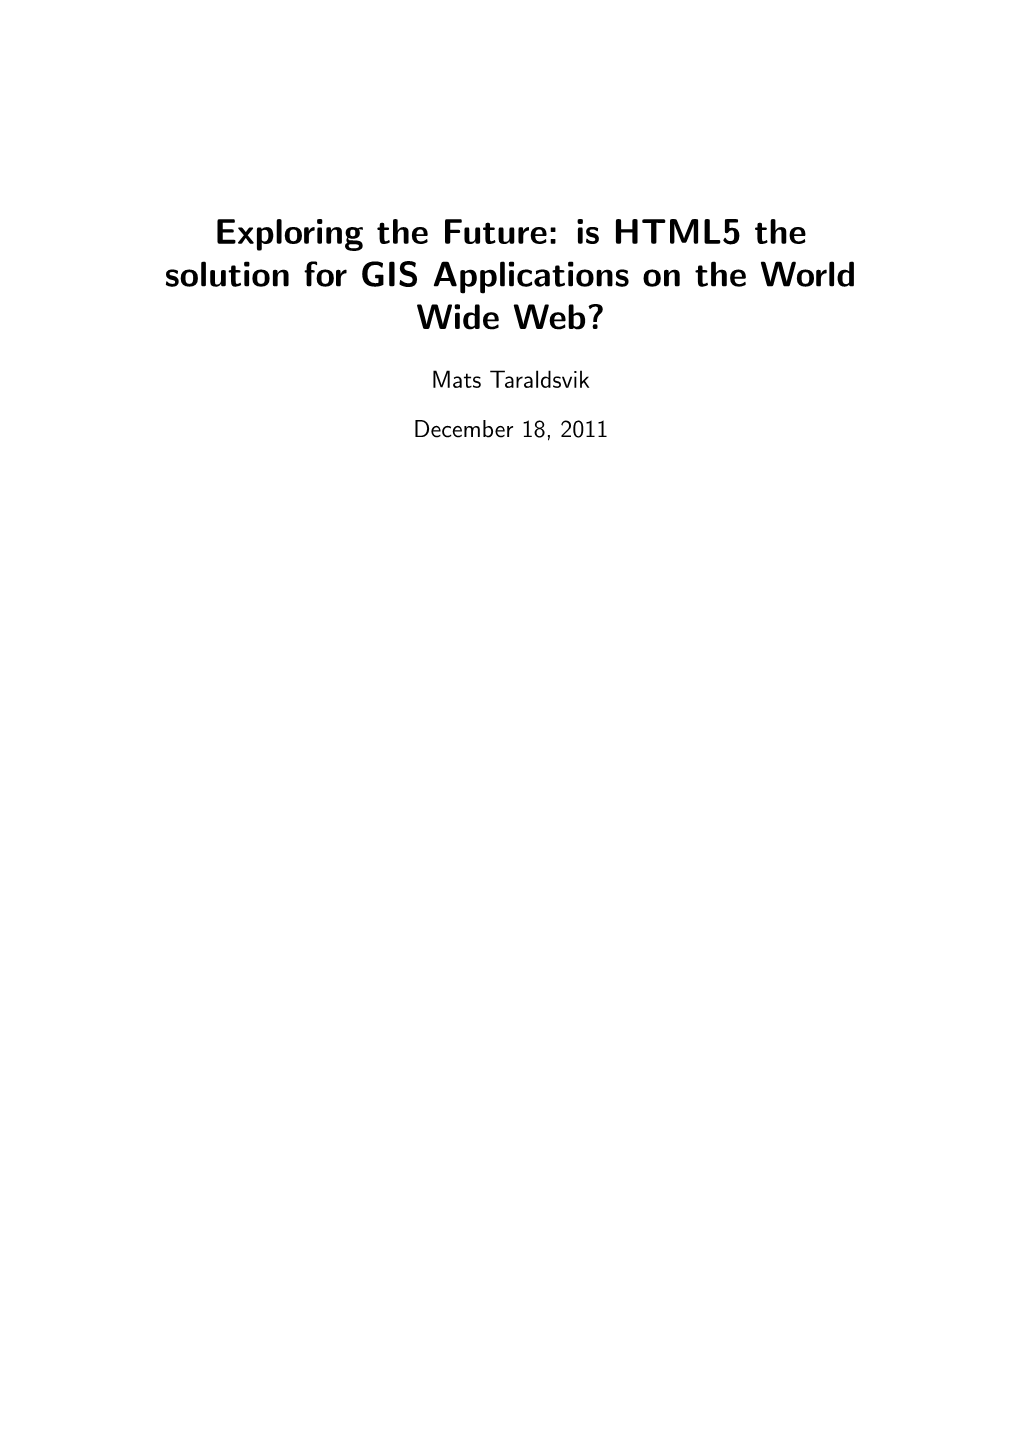 Exploring the Future: Is HTML5 the Solution for GIS Applications on the World Wide Web?